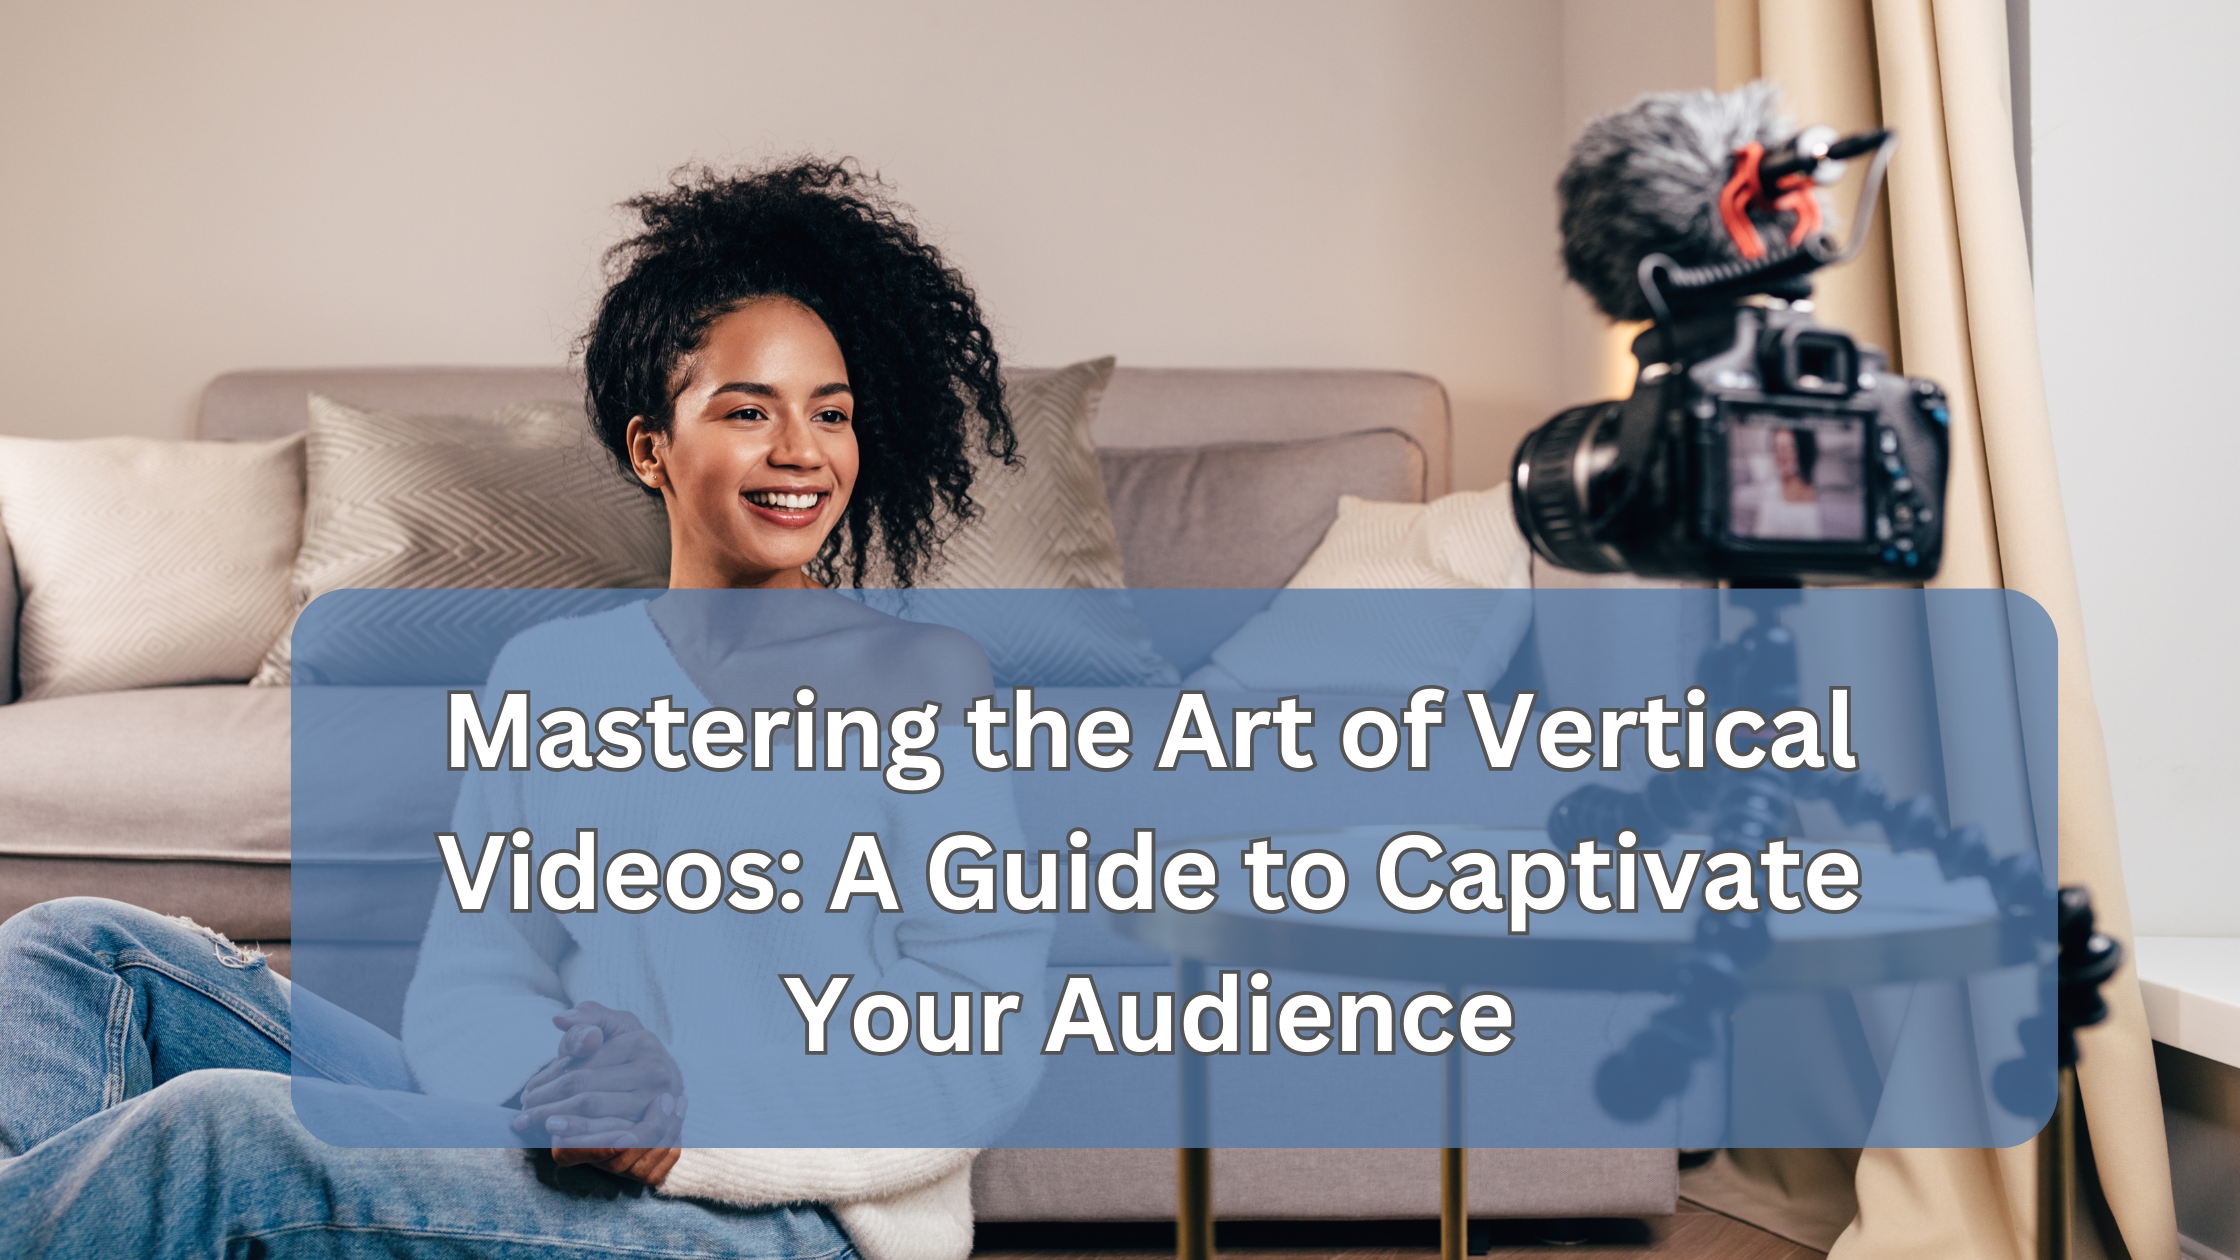 Mastering the Art of Vertical Videos: A Guide to Captivate Your Audience